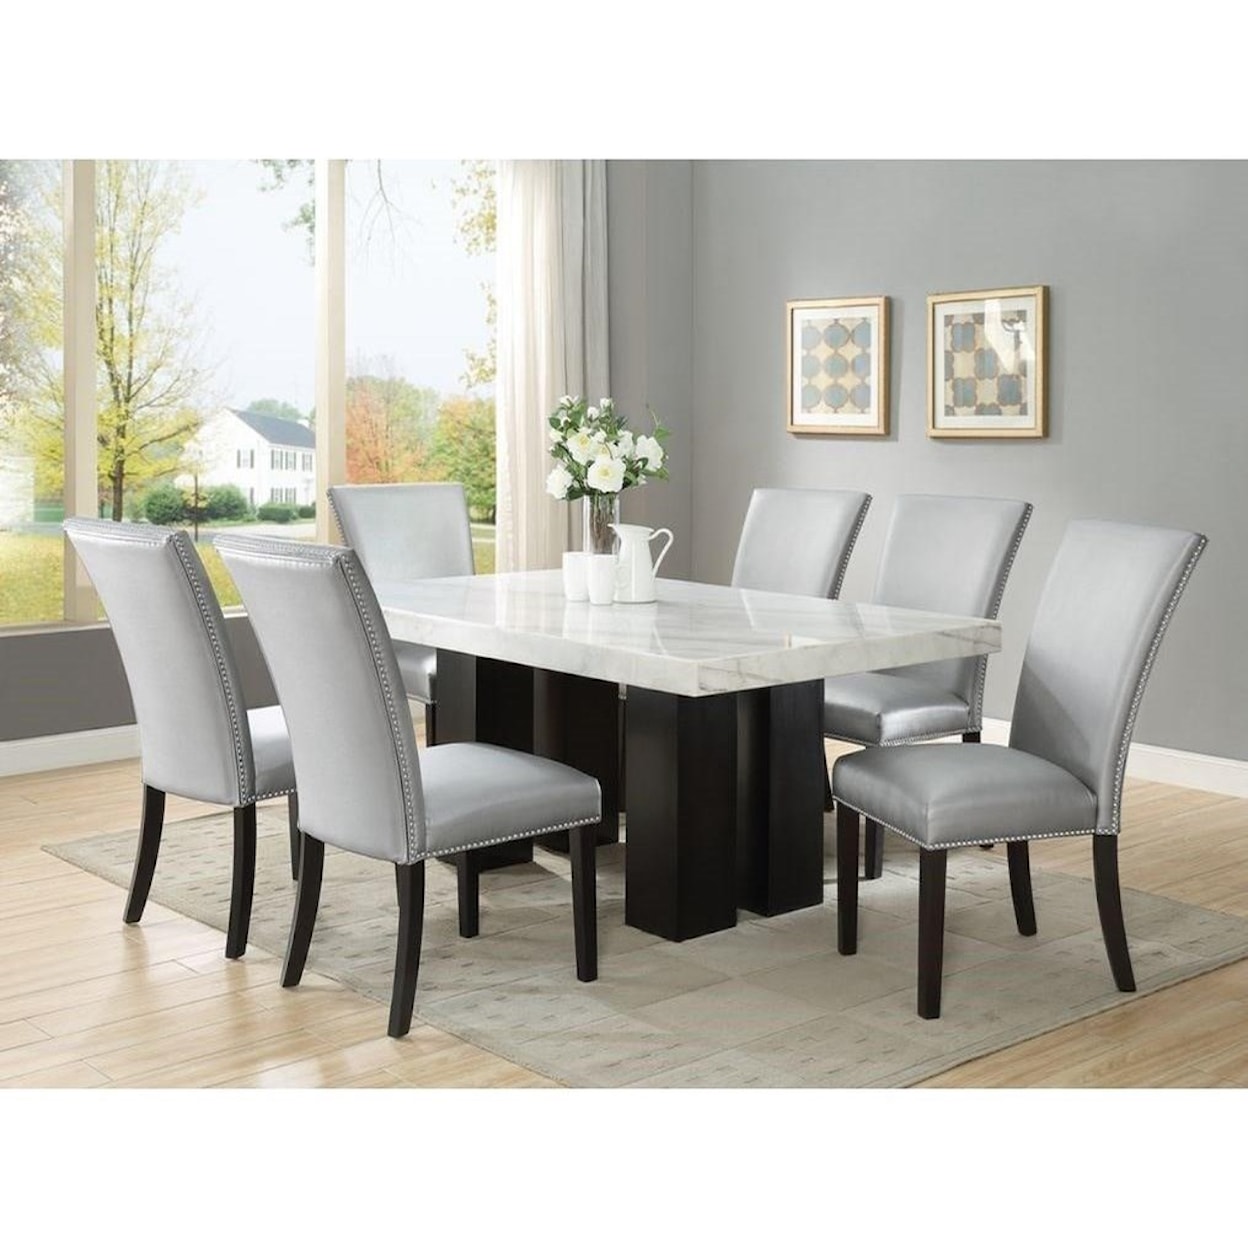 Prime Camila Dining Chair with Nailhead